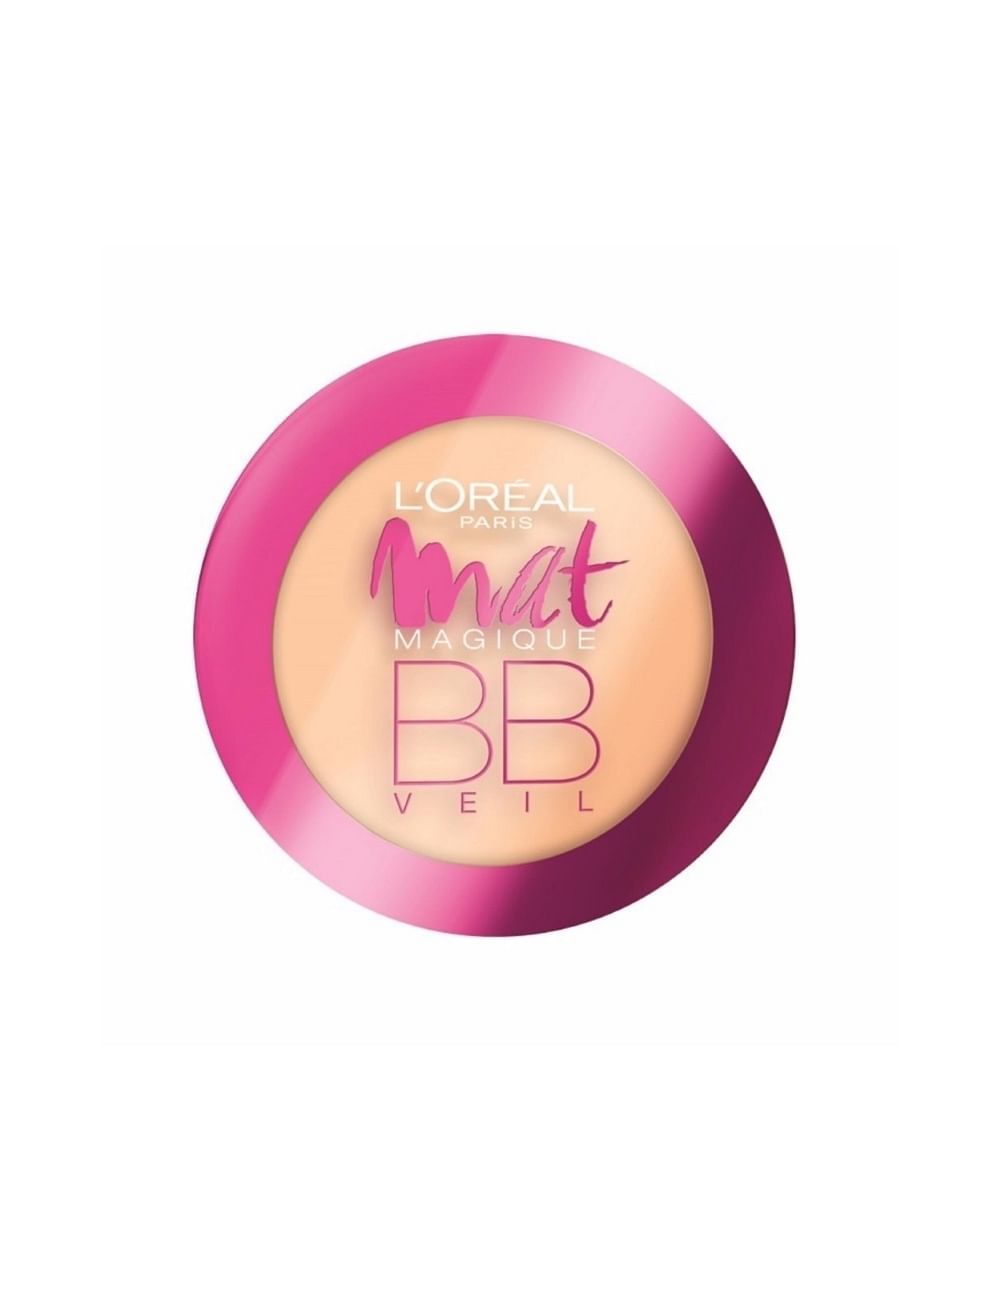 6 Pressed Powders To Ensure Flawless While Out Visiting During CNY L’Oreal Paris Mat Magique BB Veil Oil Blotting Powder